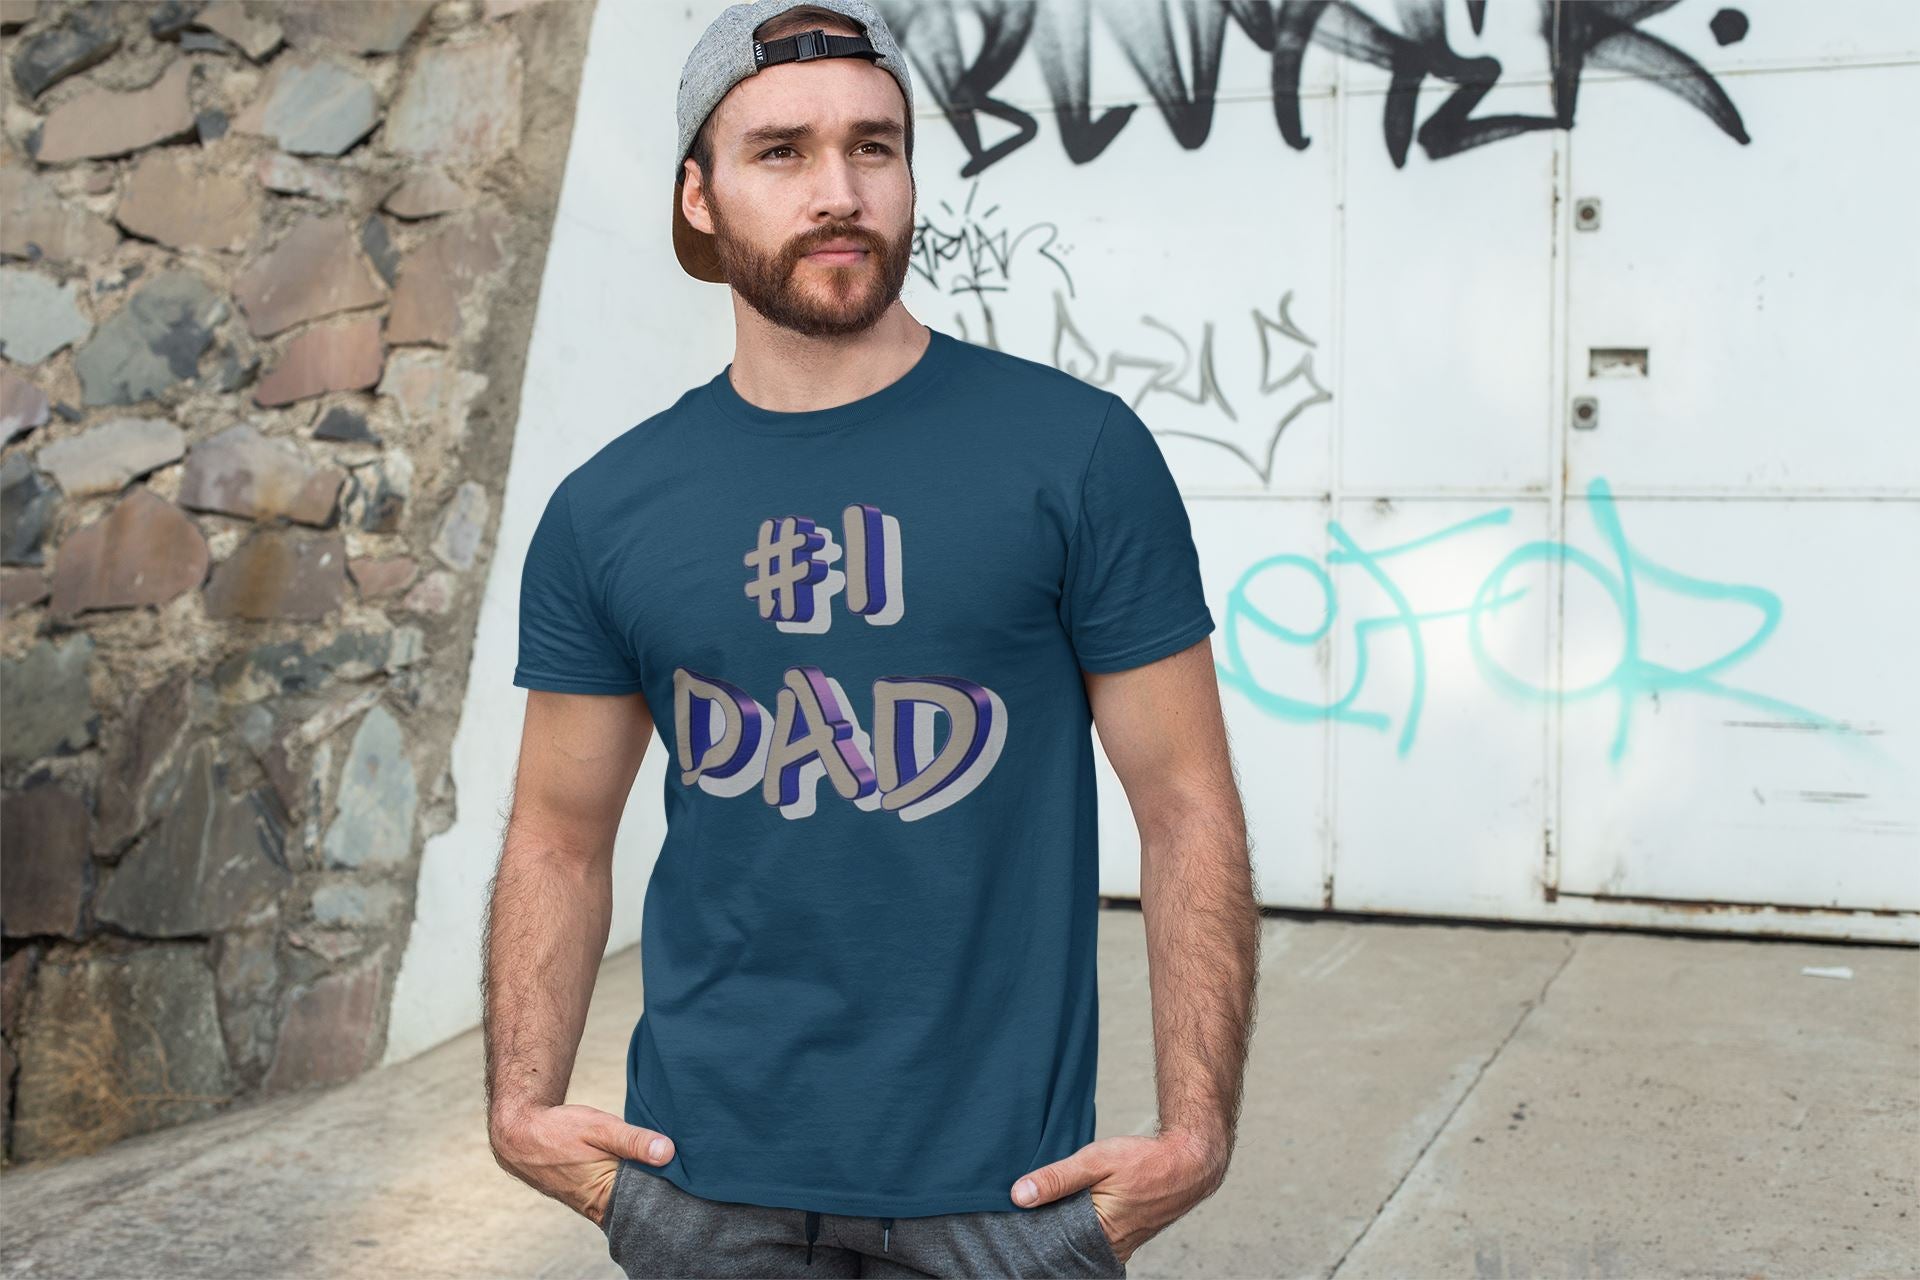 Hashtag No.1 Dad Exclusive Navy Blue T Shirt for Men and Women freeshipping - Catch My Drift India